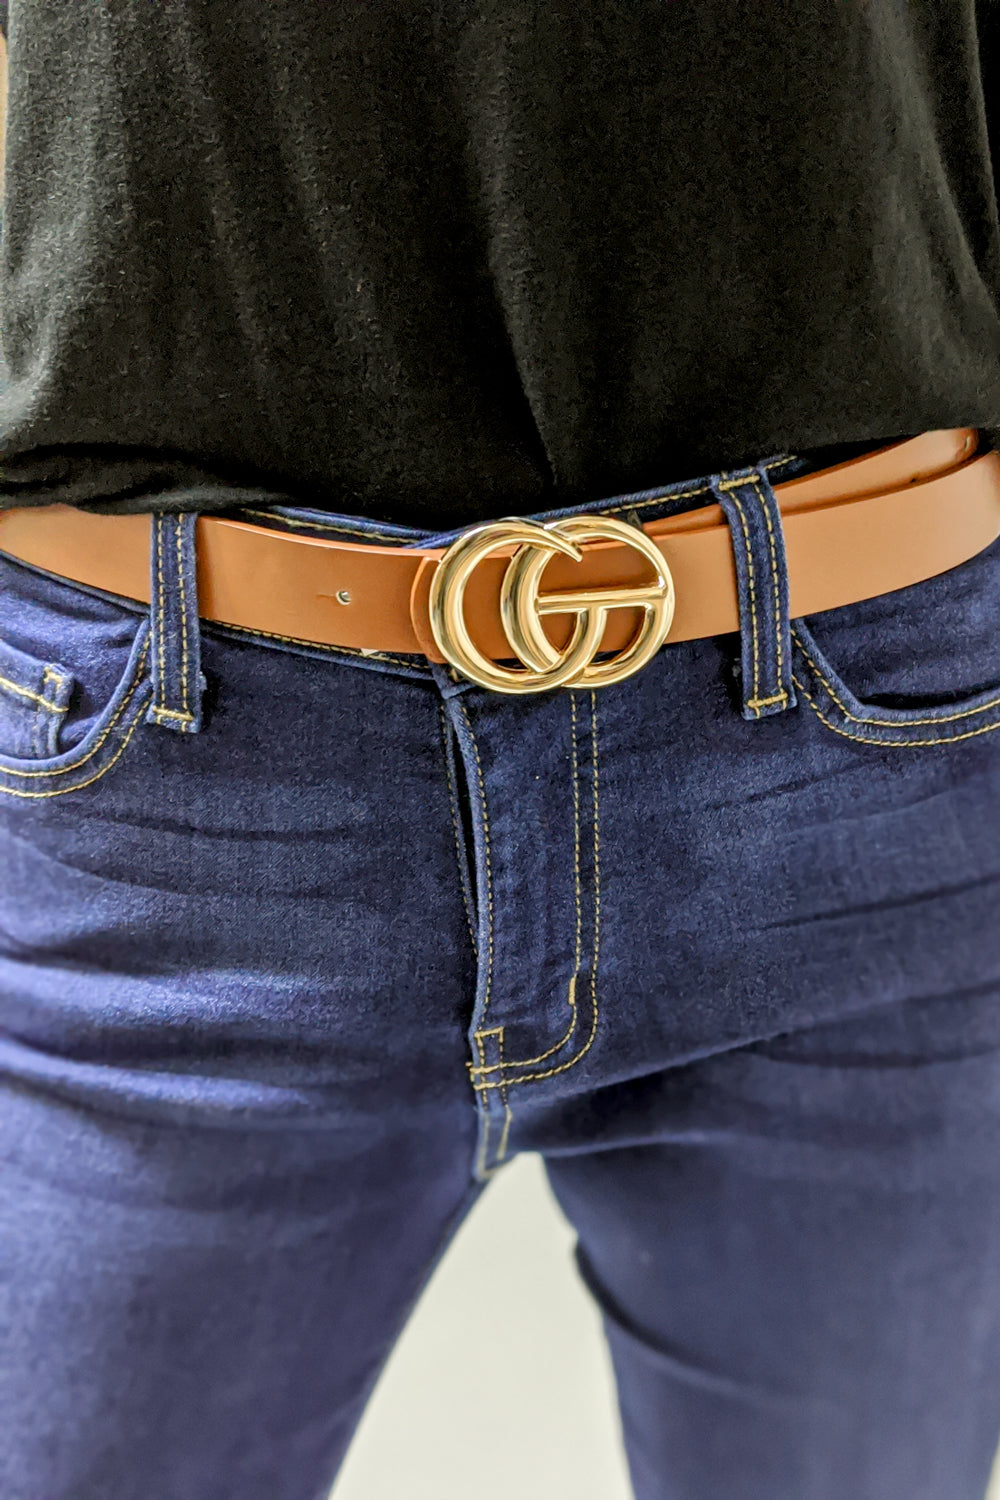 1" Double Ring Buckle Belt - Brown